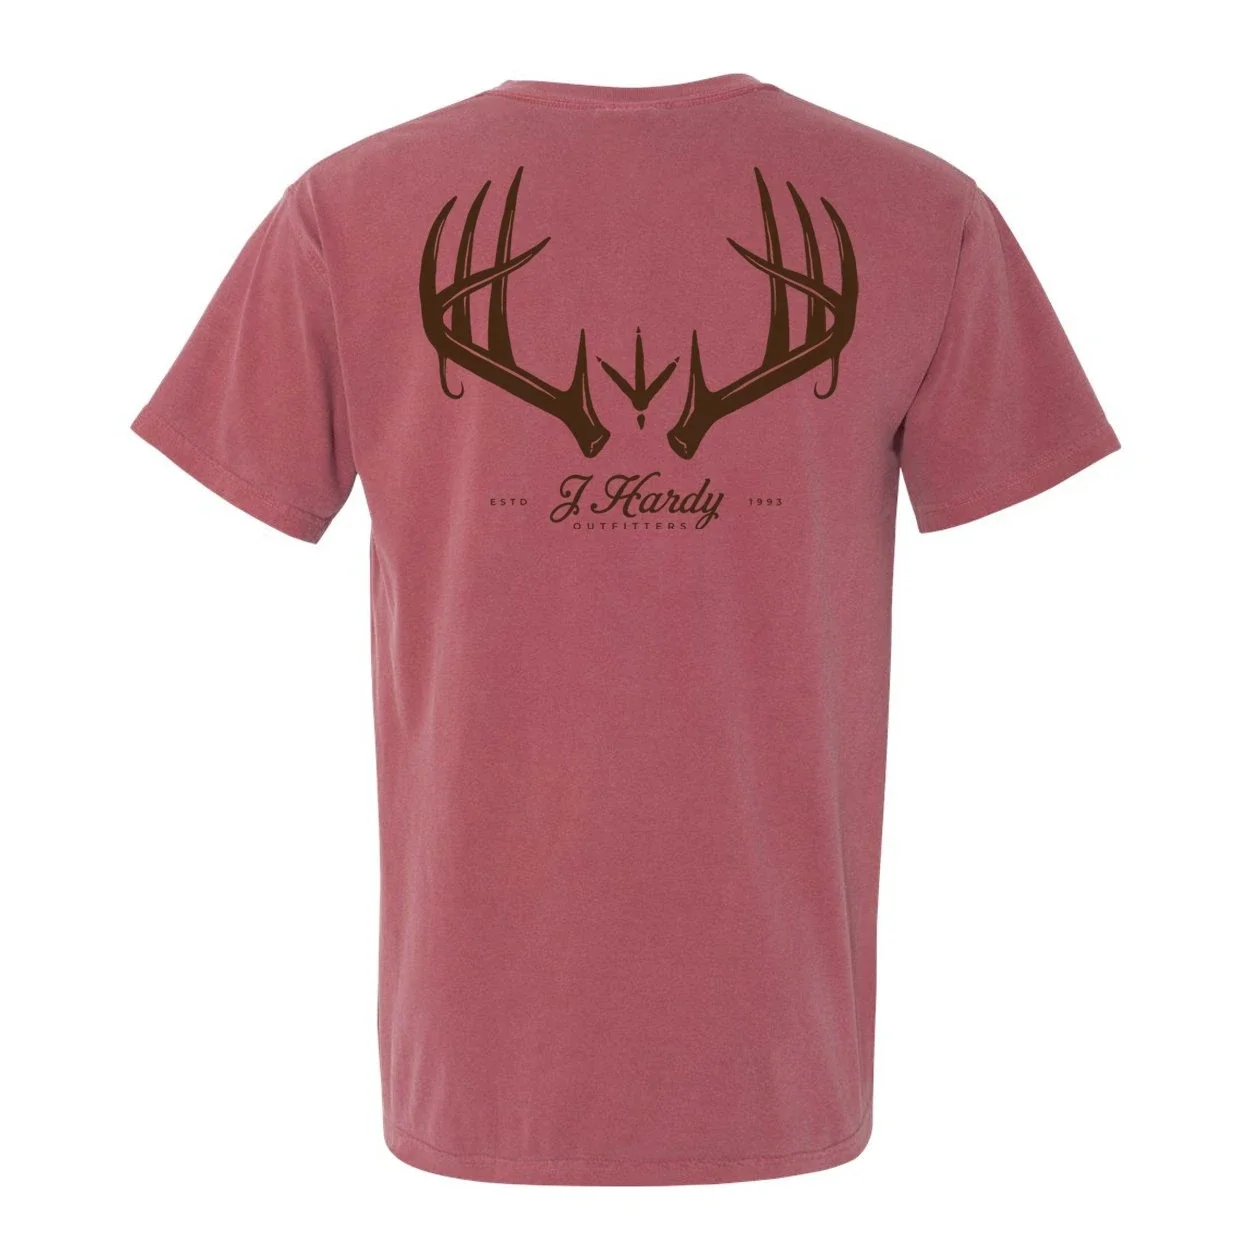 J Hardy Outfitters - Check out these new T-shirt designs from J